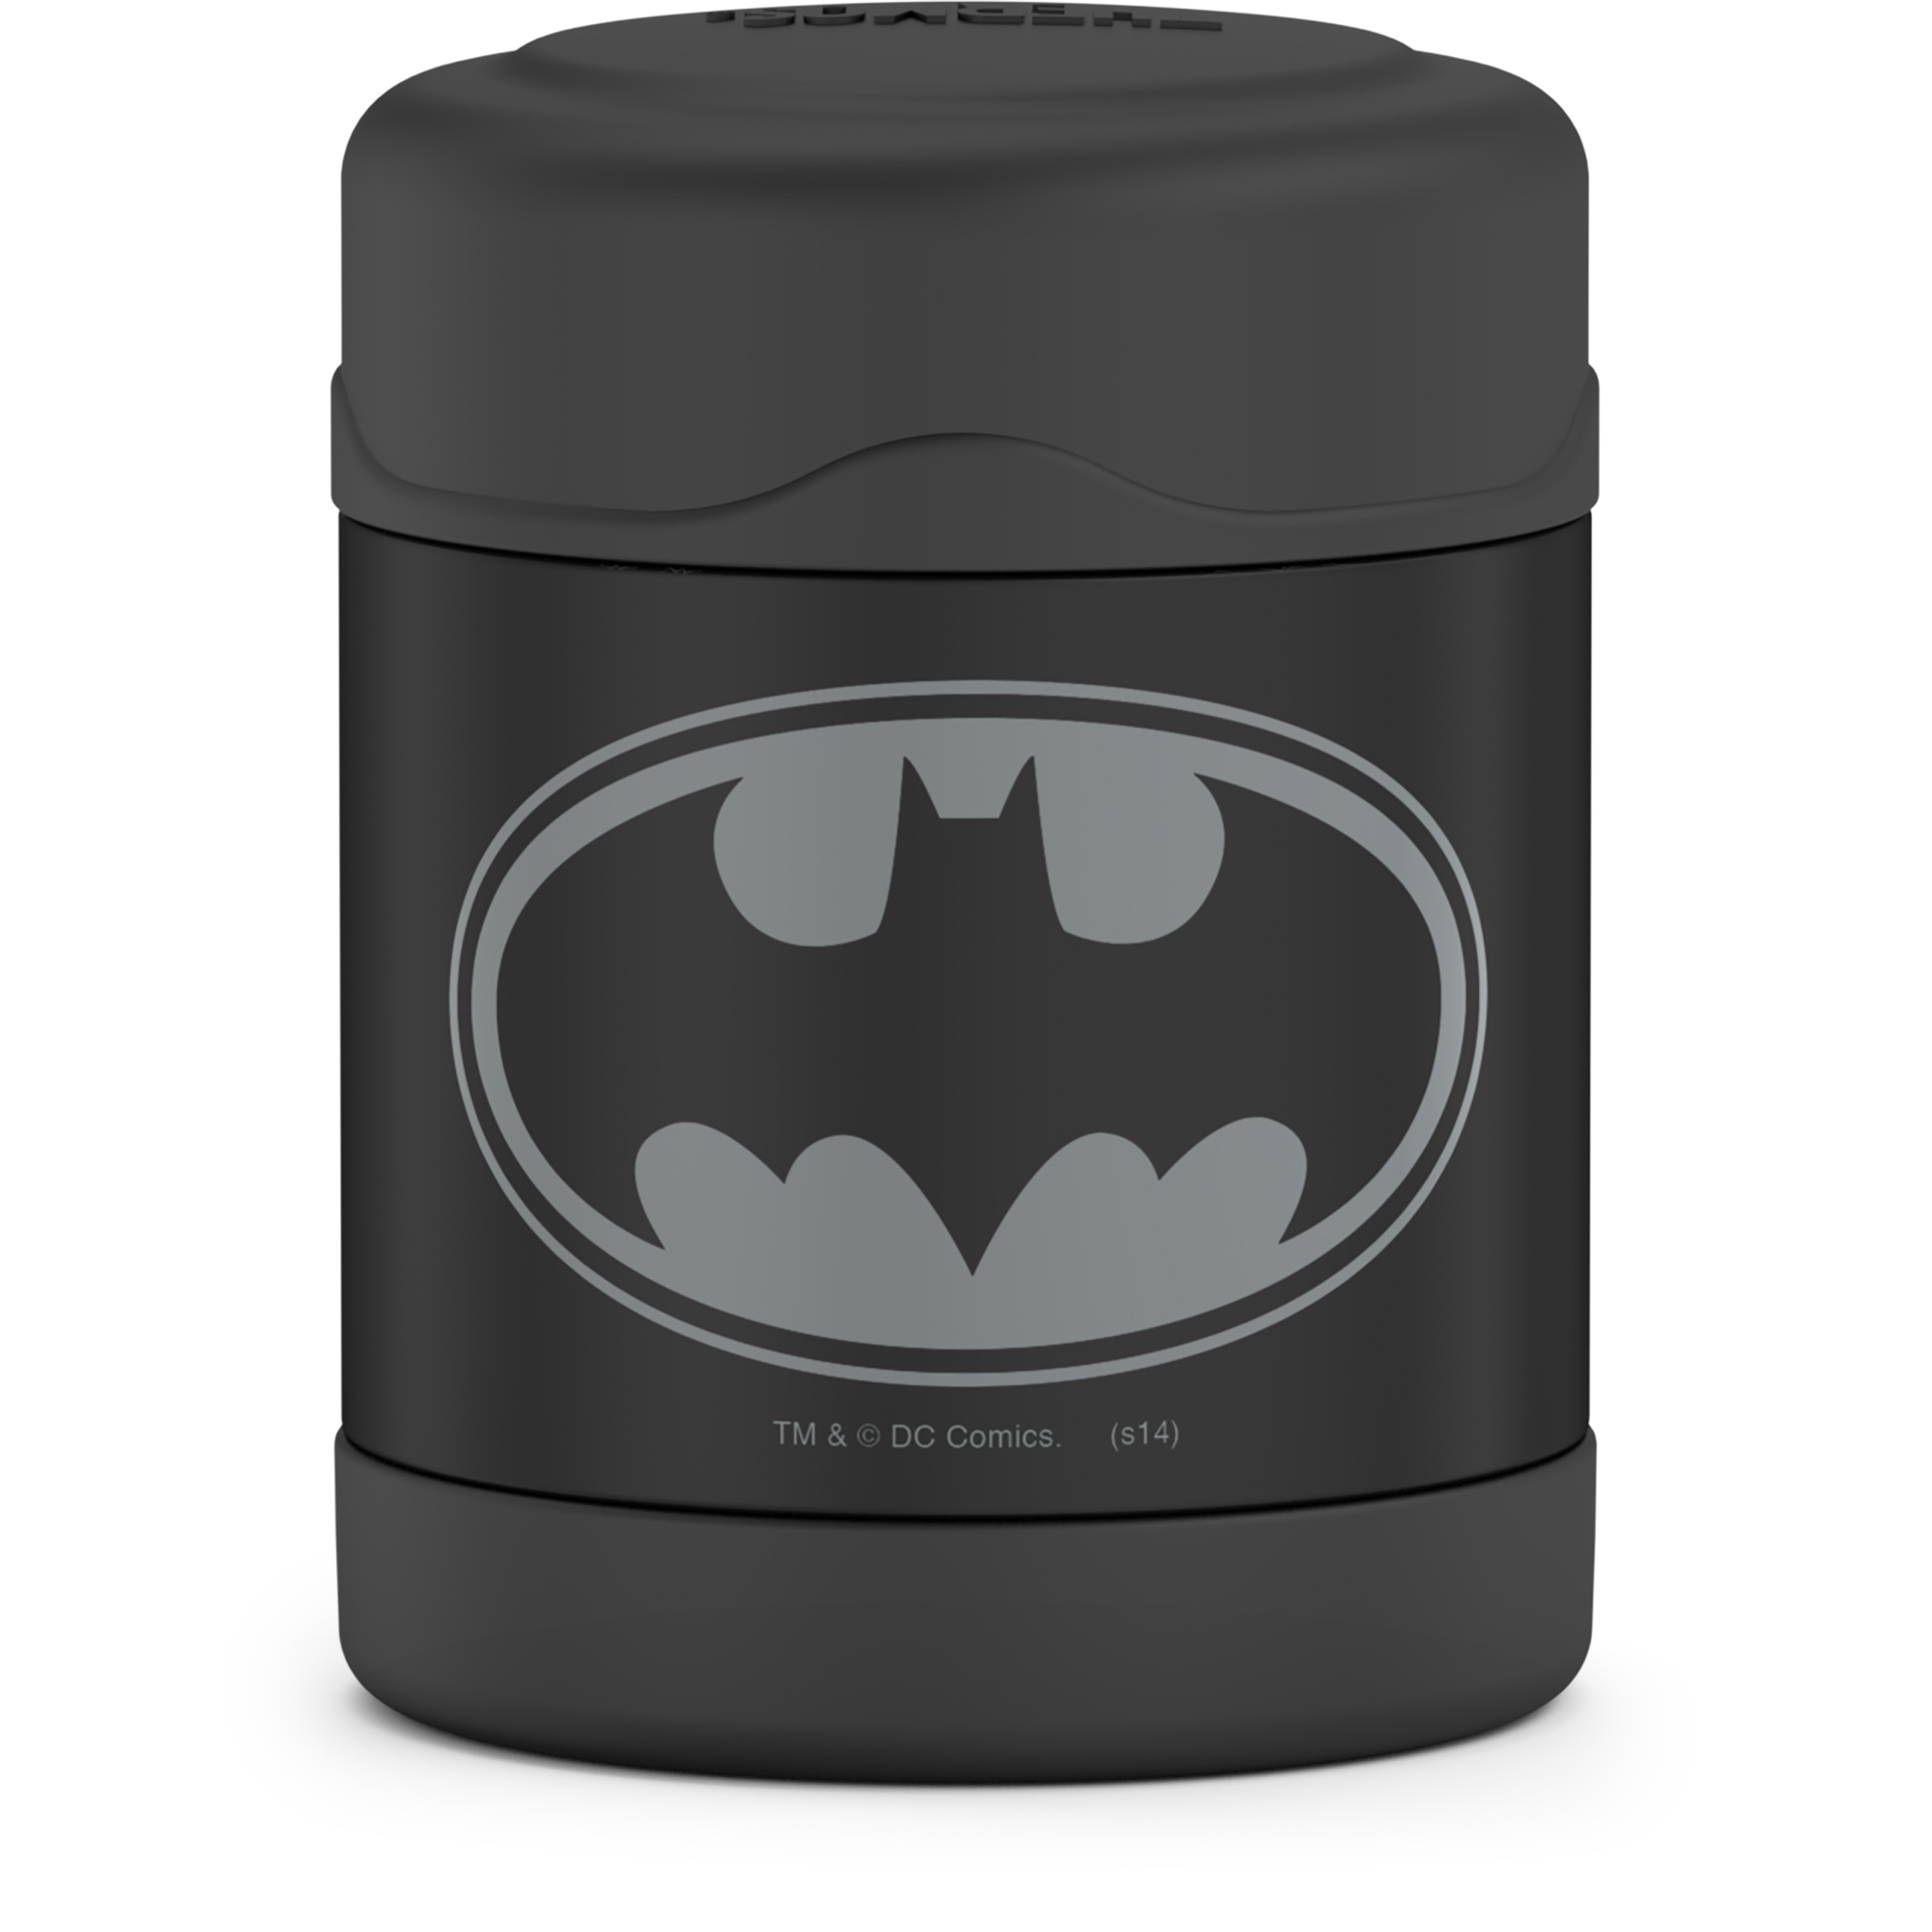 Thermos Vacuum Insulated Funtainer Food Jar, Batman, 10 ounce - image 2 of 3